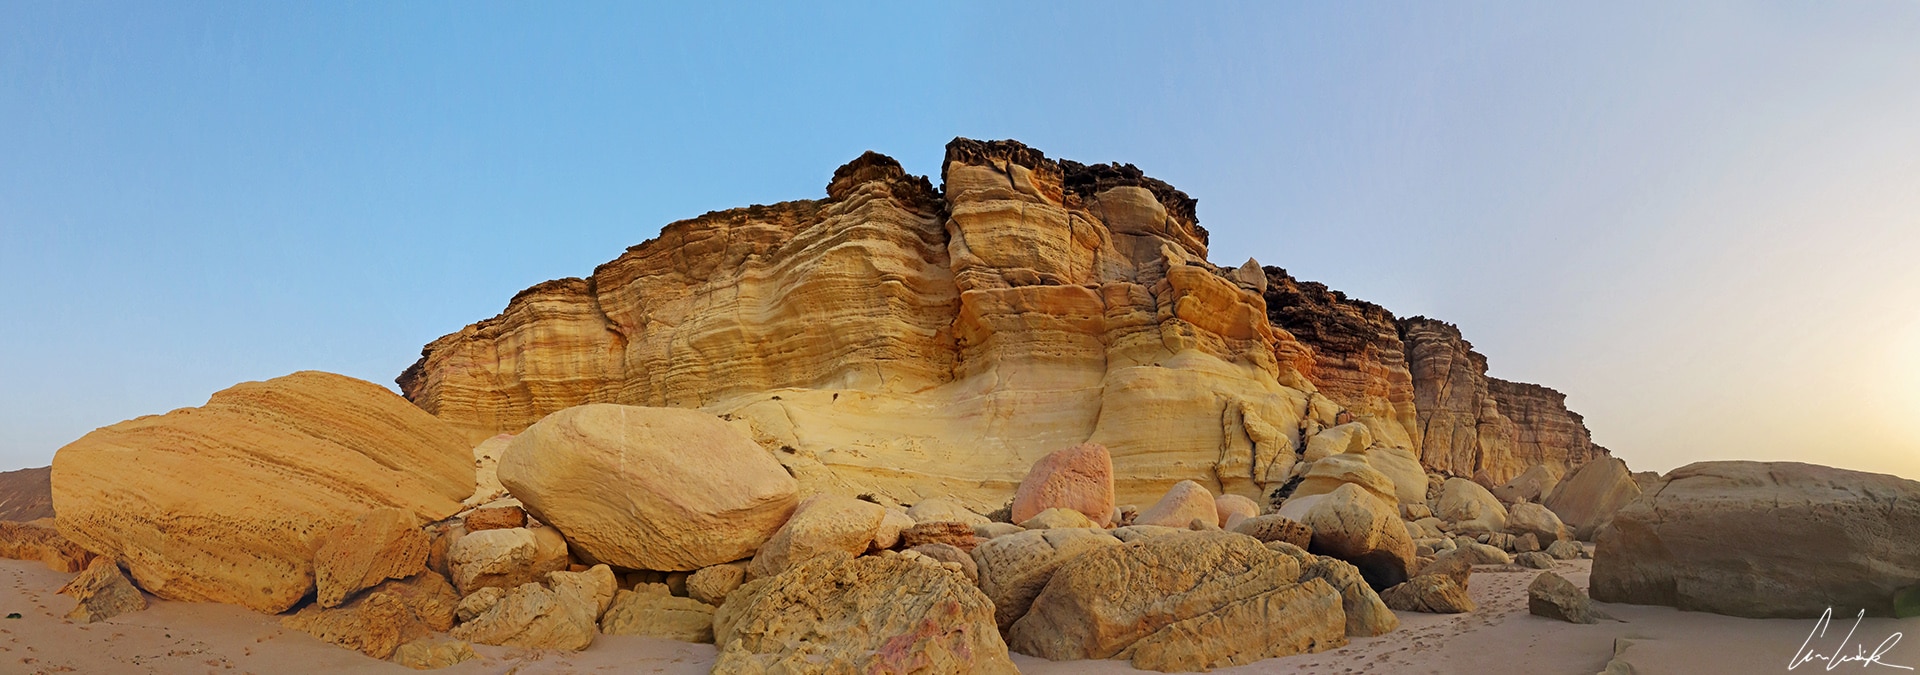 Ras al-Jinz beach has beautiful and colorful cliffs. The orange-colored rock is carved and sculpted.